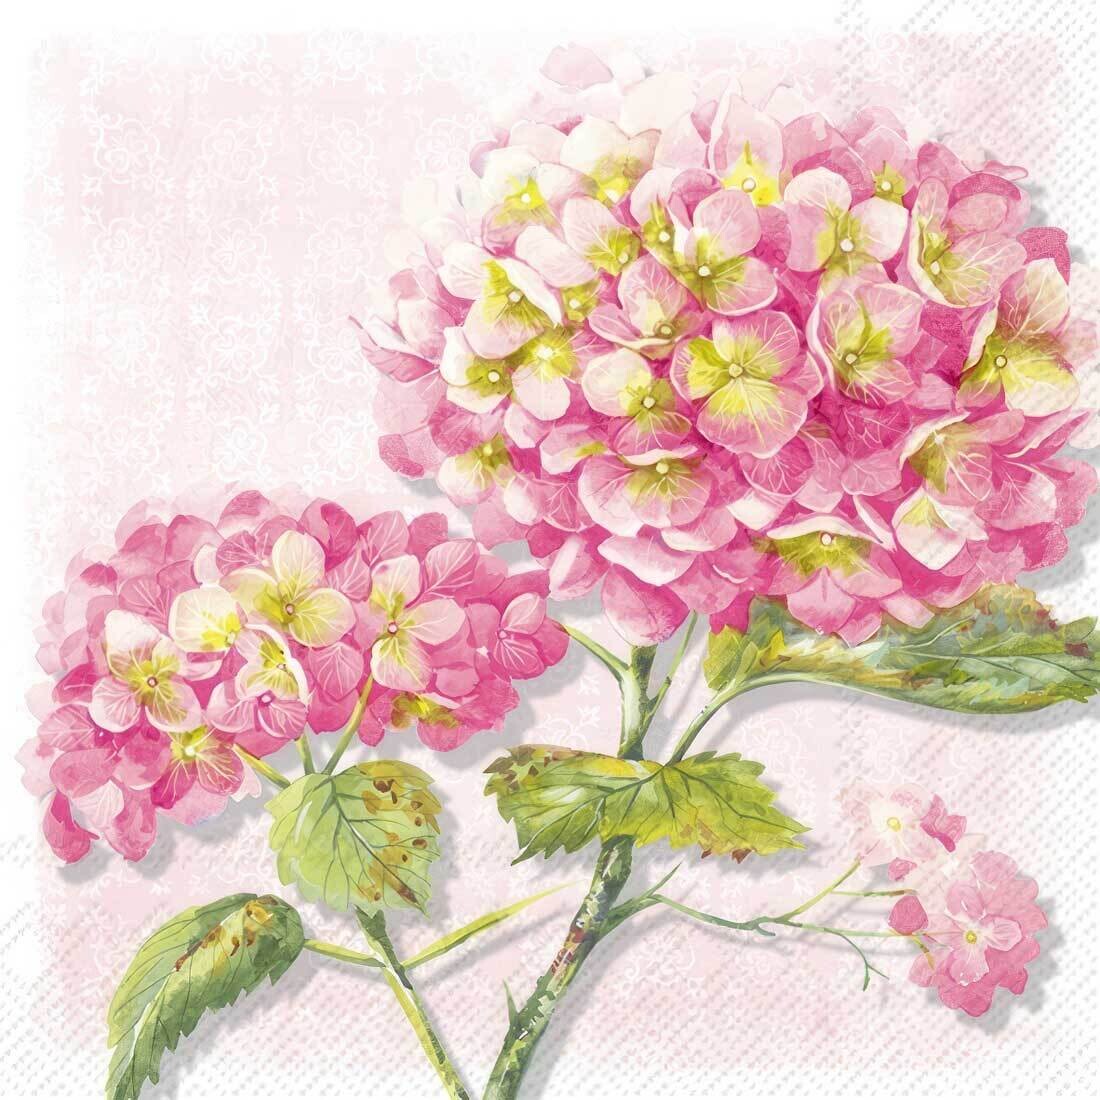 Decoupage Paper Napkins - Floral - Lorea Rose
The Decoupage tissue paper features a delicate and enchanting design of pink hydrangea blossoms. The intricately illustrated flowers exhibit varying shades of pink, from soft pastels to deeper hues, creating a sense of depth and dimension. Each blossom is adorned with delicate details, such as delicate petals and small clusters of yellow stamen. The green leaves provide a natural contrast to the pink blooms, adding to the overall elegance of the design. The subtle white background, adorned with intricate patterns, enhances the ethereal and romantic feel of the tissue paper. This design would be perfect for adding a touch of floral beauty to various crafting projects.